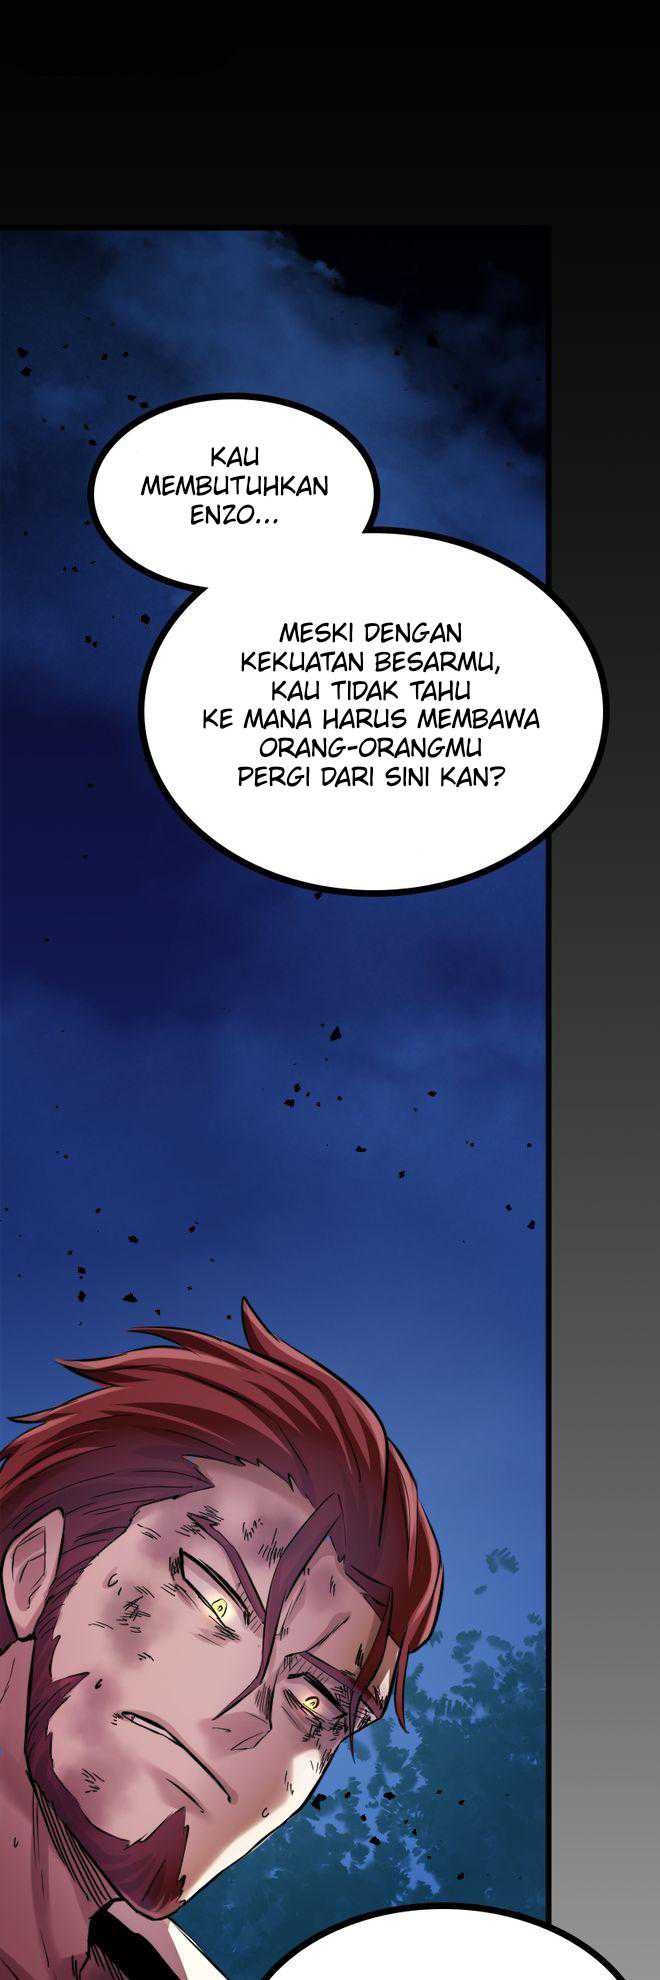 DevilUp Chapter 05